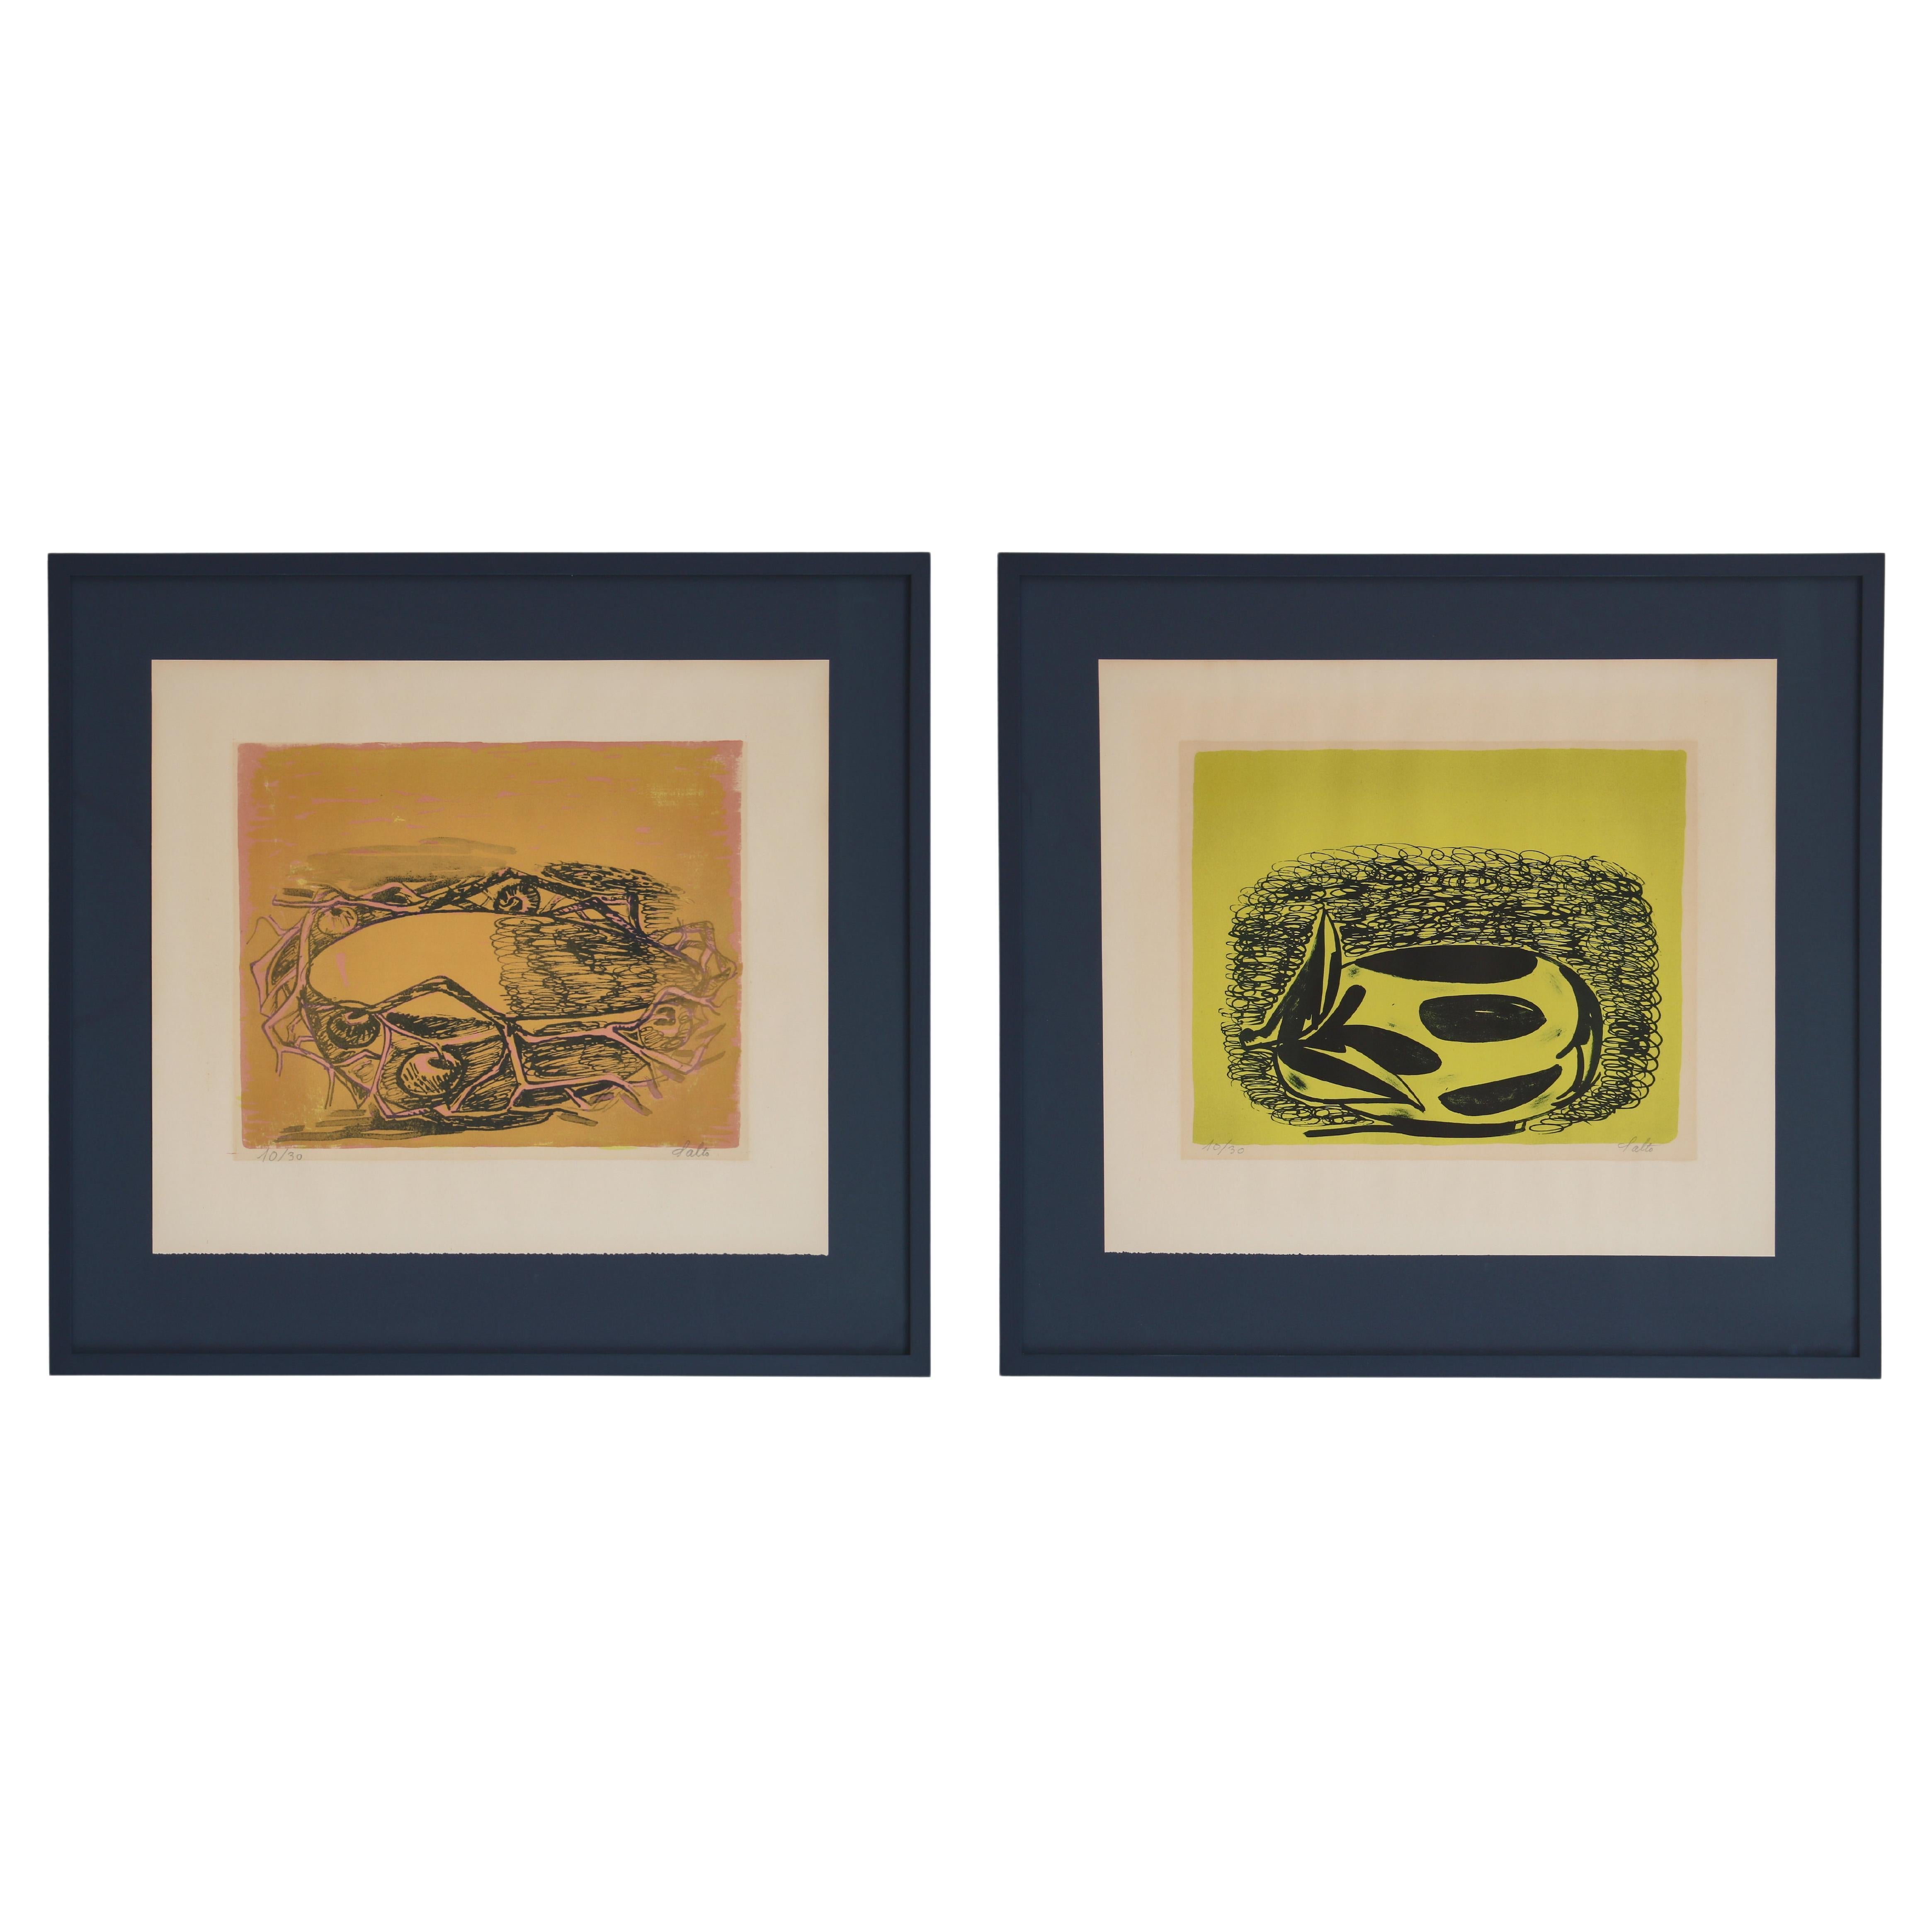 Pair of Original Axel Salto Lithographies in Blue Frames, 1930s For Sale